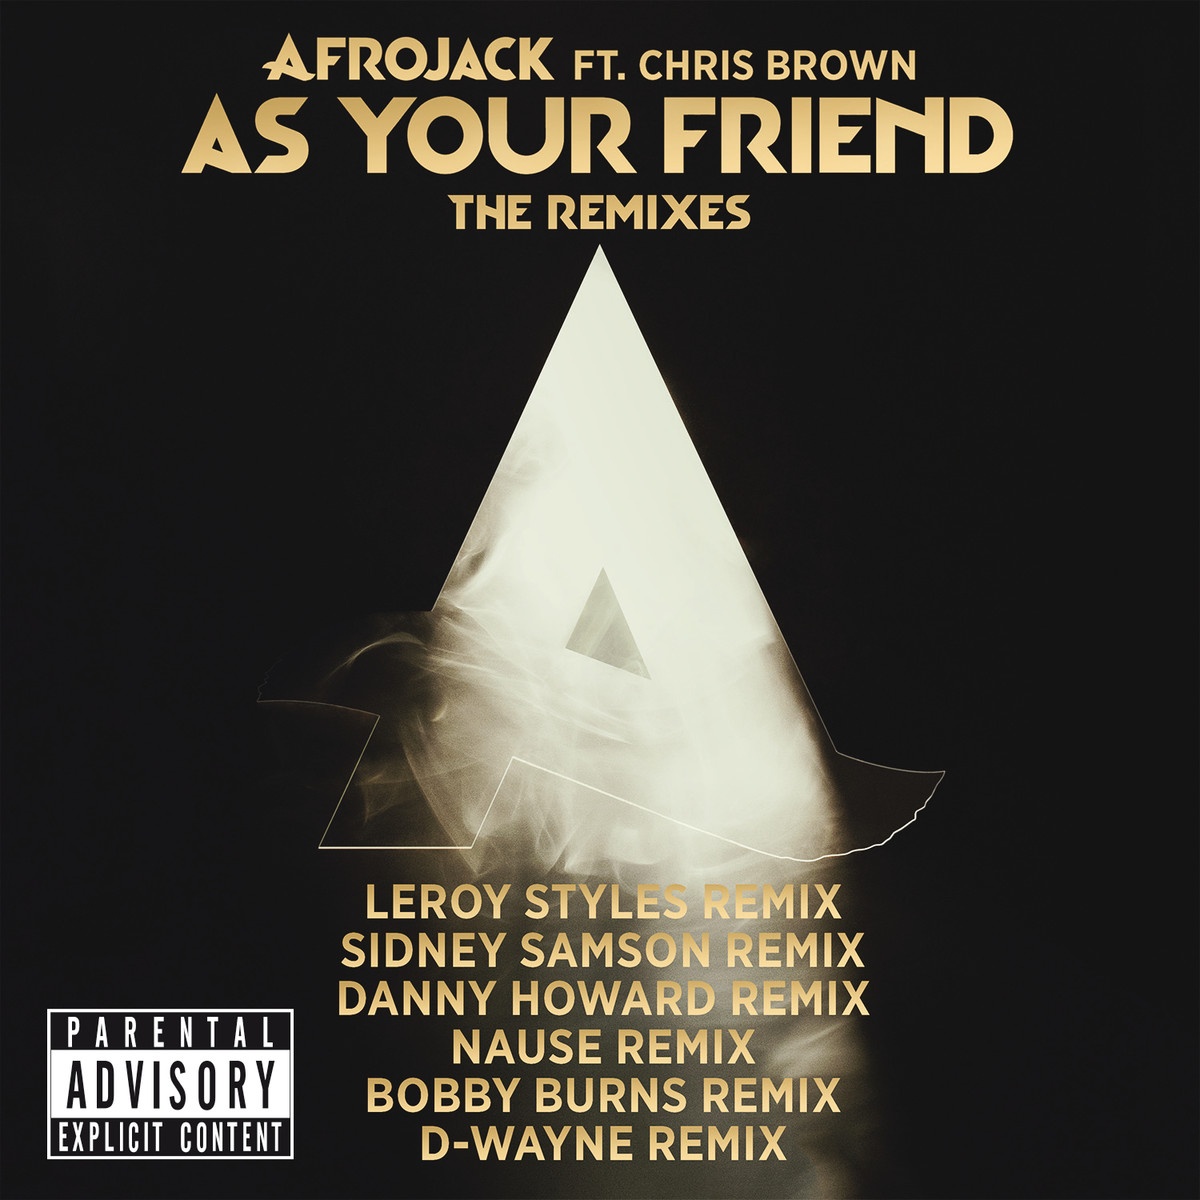 As Your Friend - Leroy Styles Remix